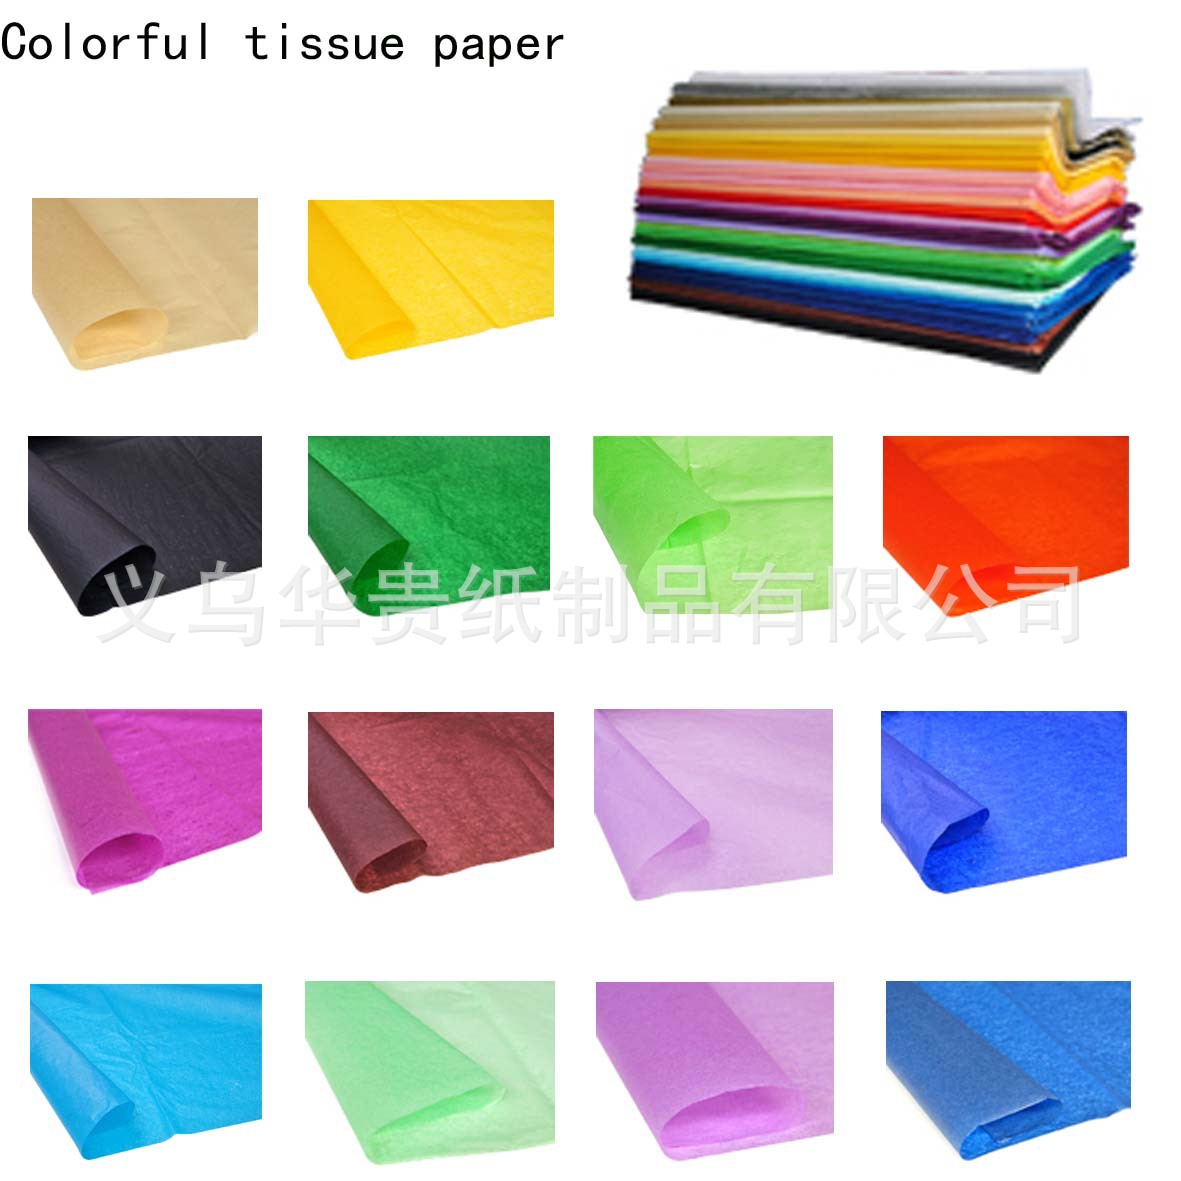 colorful tissue paper